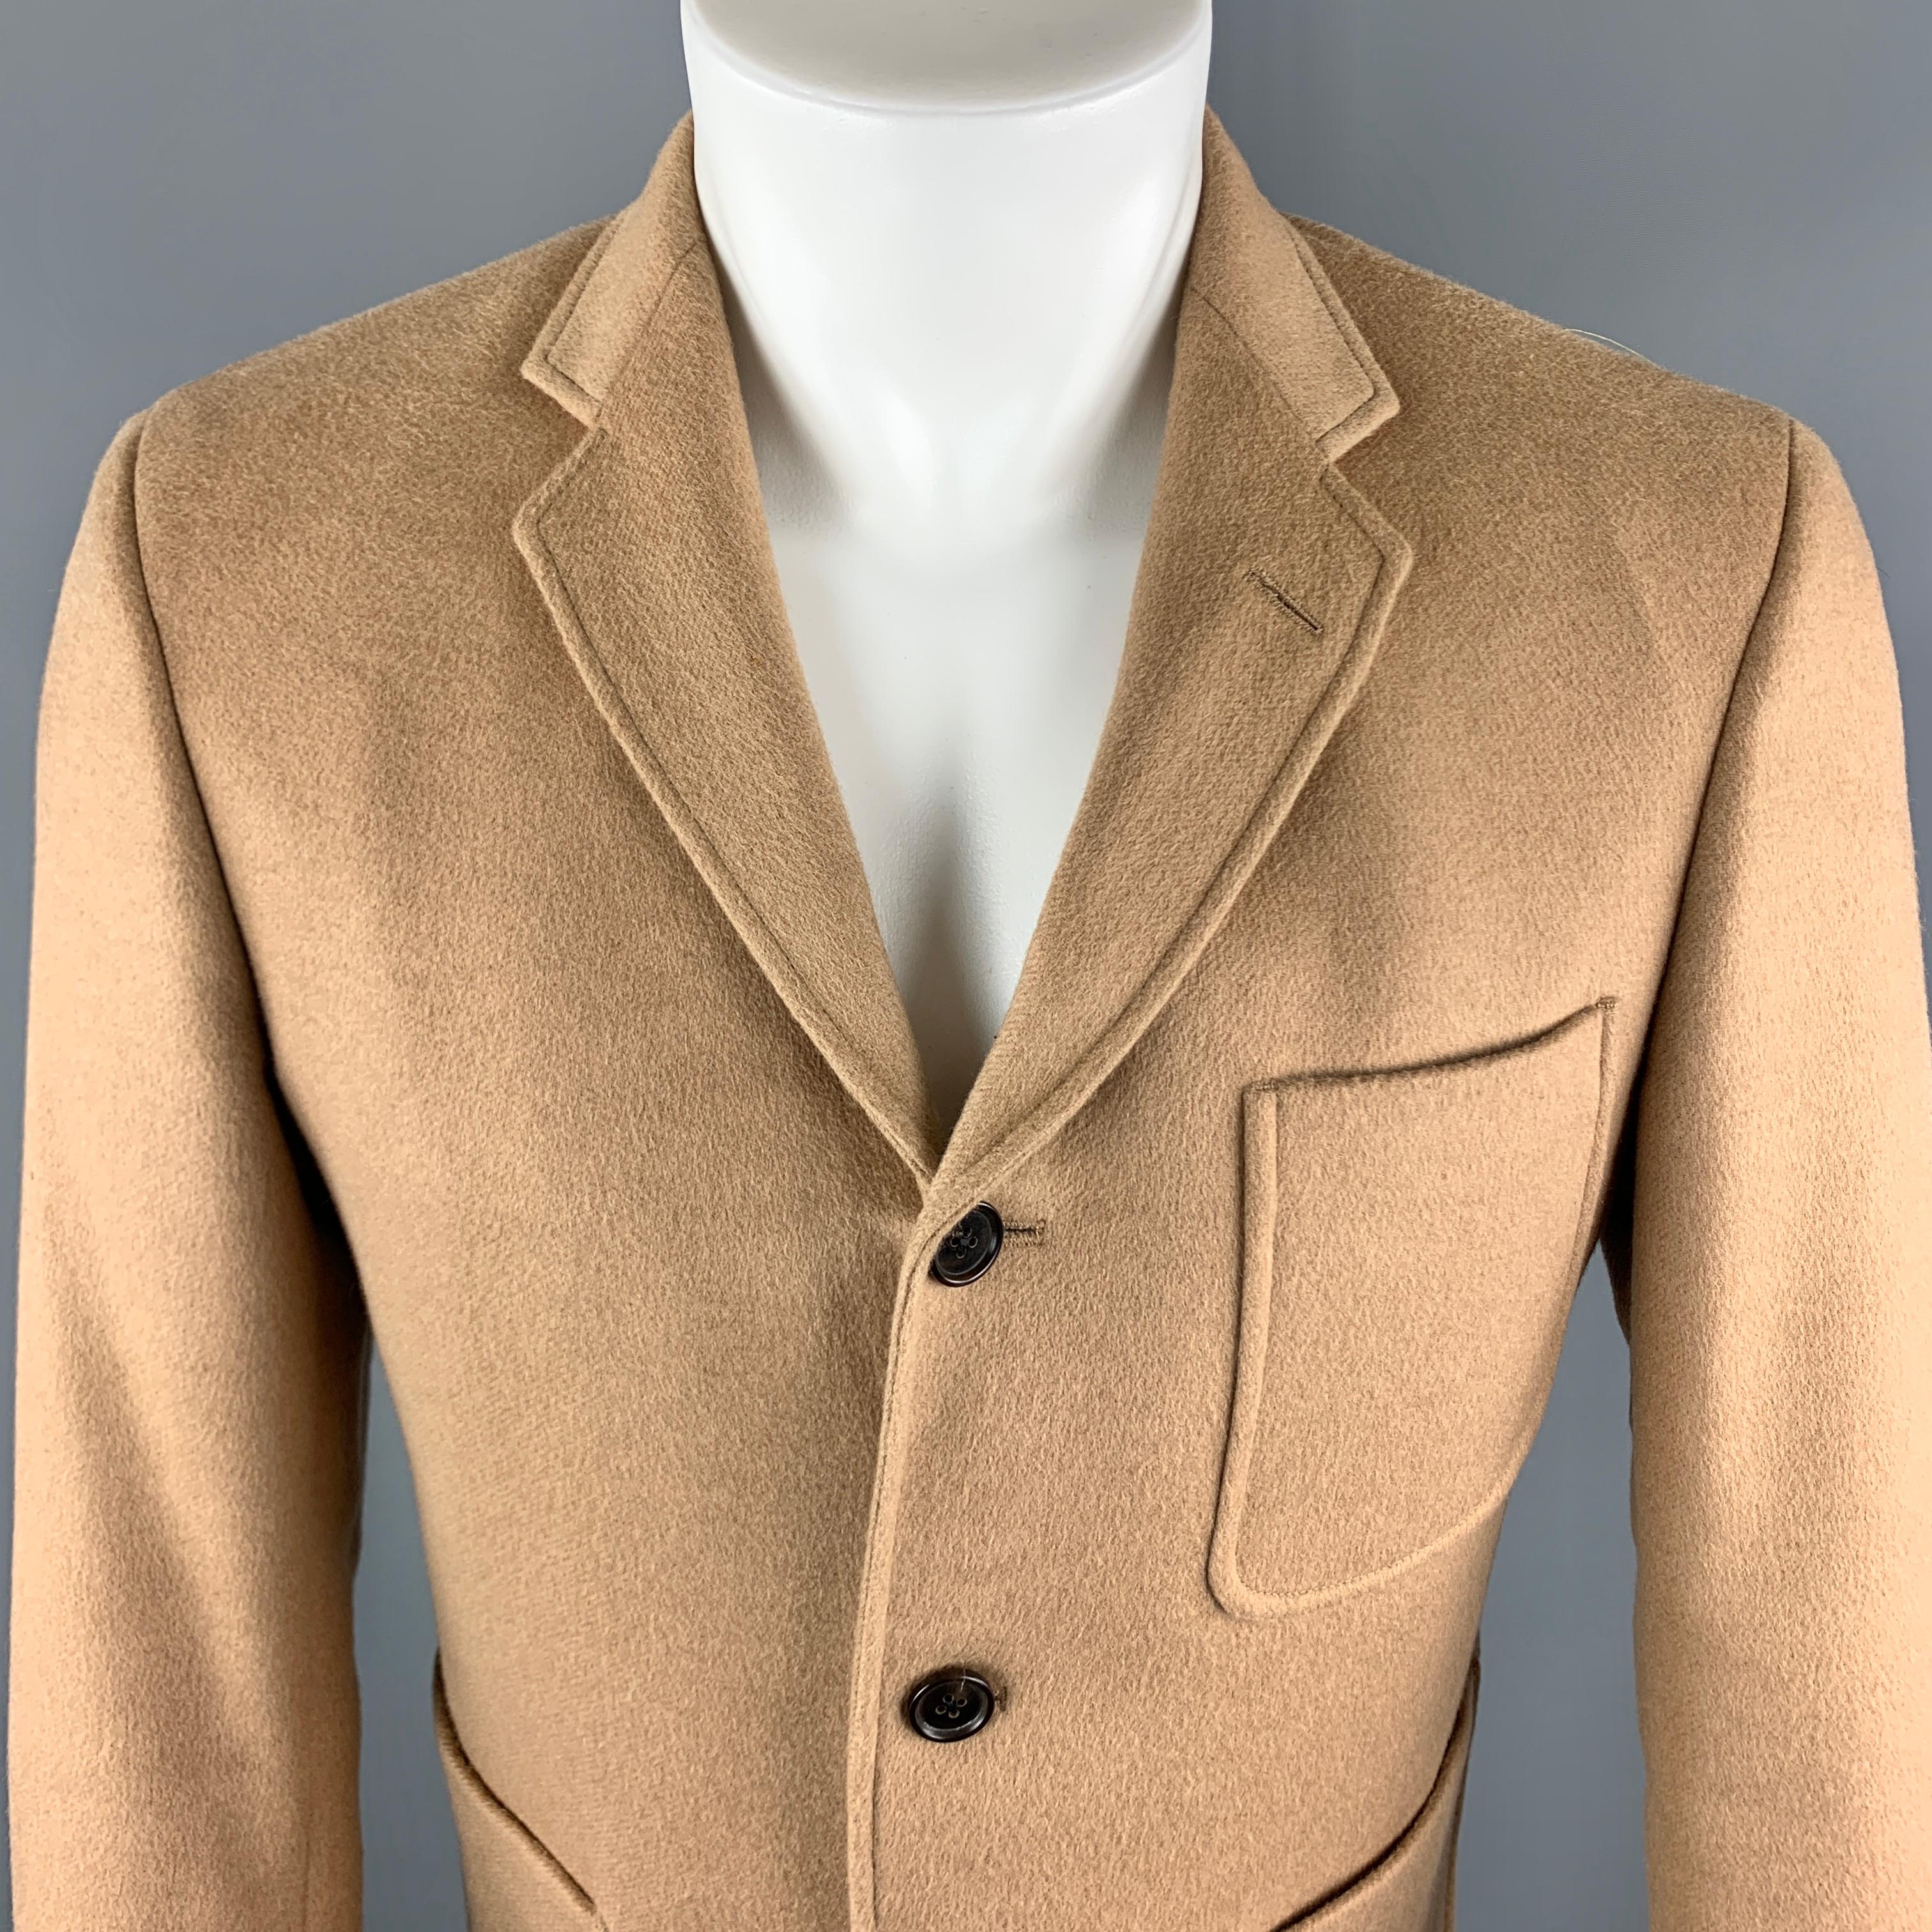 BLACK FLEECE Sport Coat comes in a tan camel hair material, with a notch lapel, single breasted, three buttons at closure, patch pockets, buttoned cuffs, a single vent at back, unlined. Made in USA.

Excellent Pre-Owned Condition.
Marked: